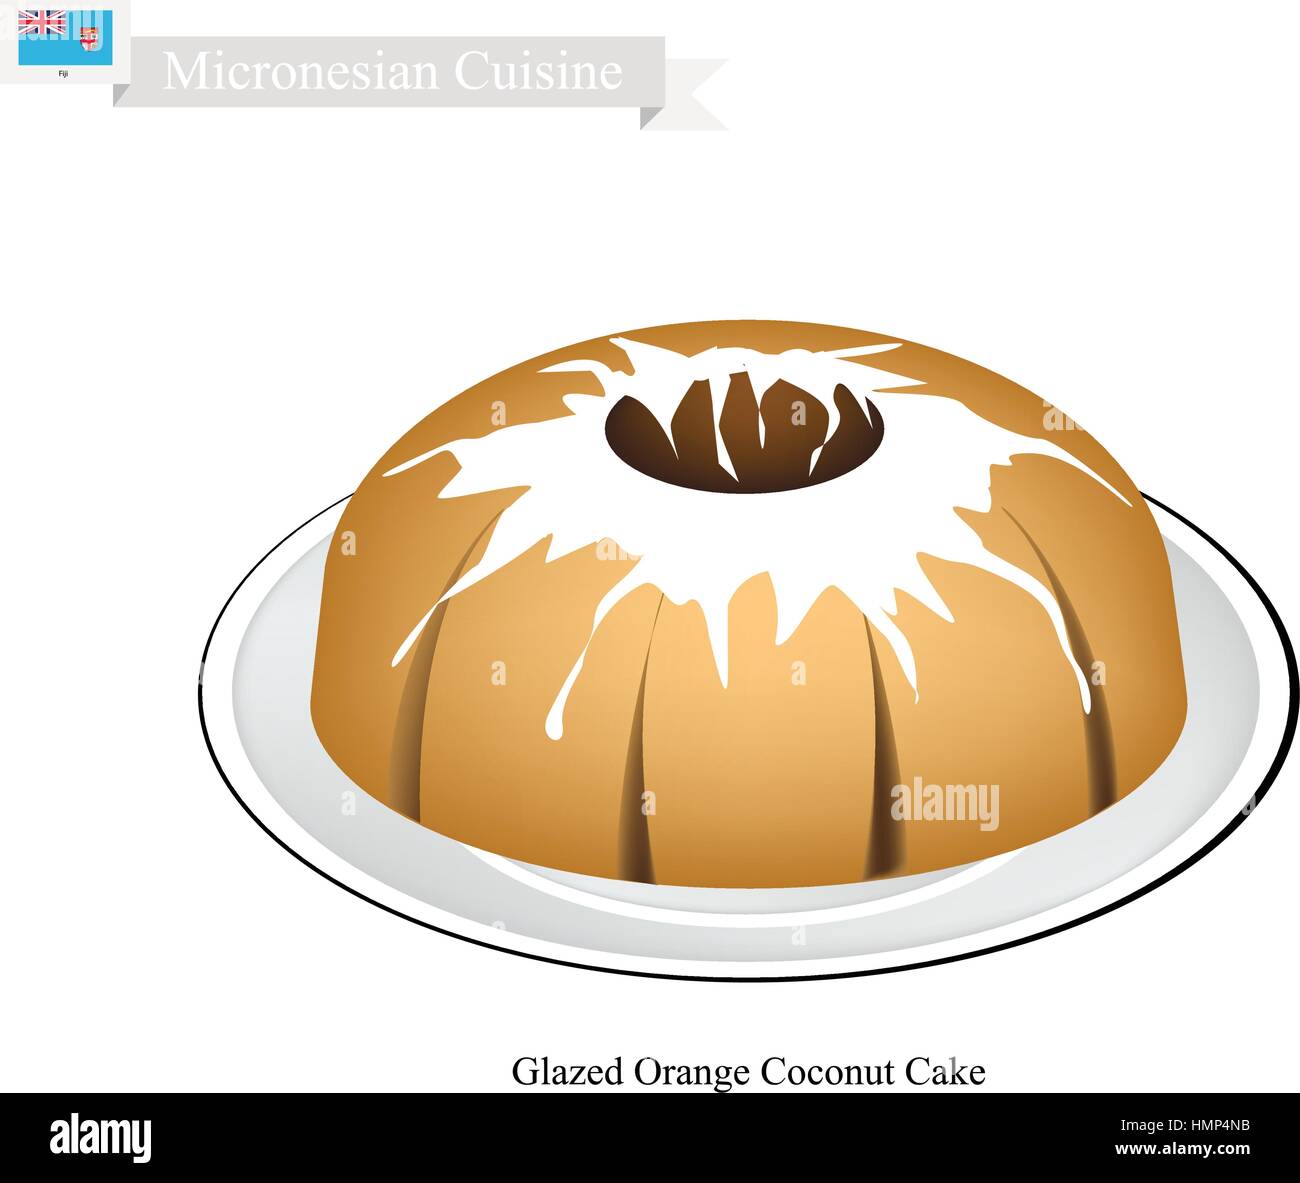 Micronesian Cuisine, Glazed Orange Coconut Cake or Traditional Big Round Cake with Hole Inside and Mirror Glaze Coating. One of Most Popular Dessert i Stock Vector